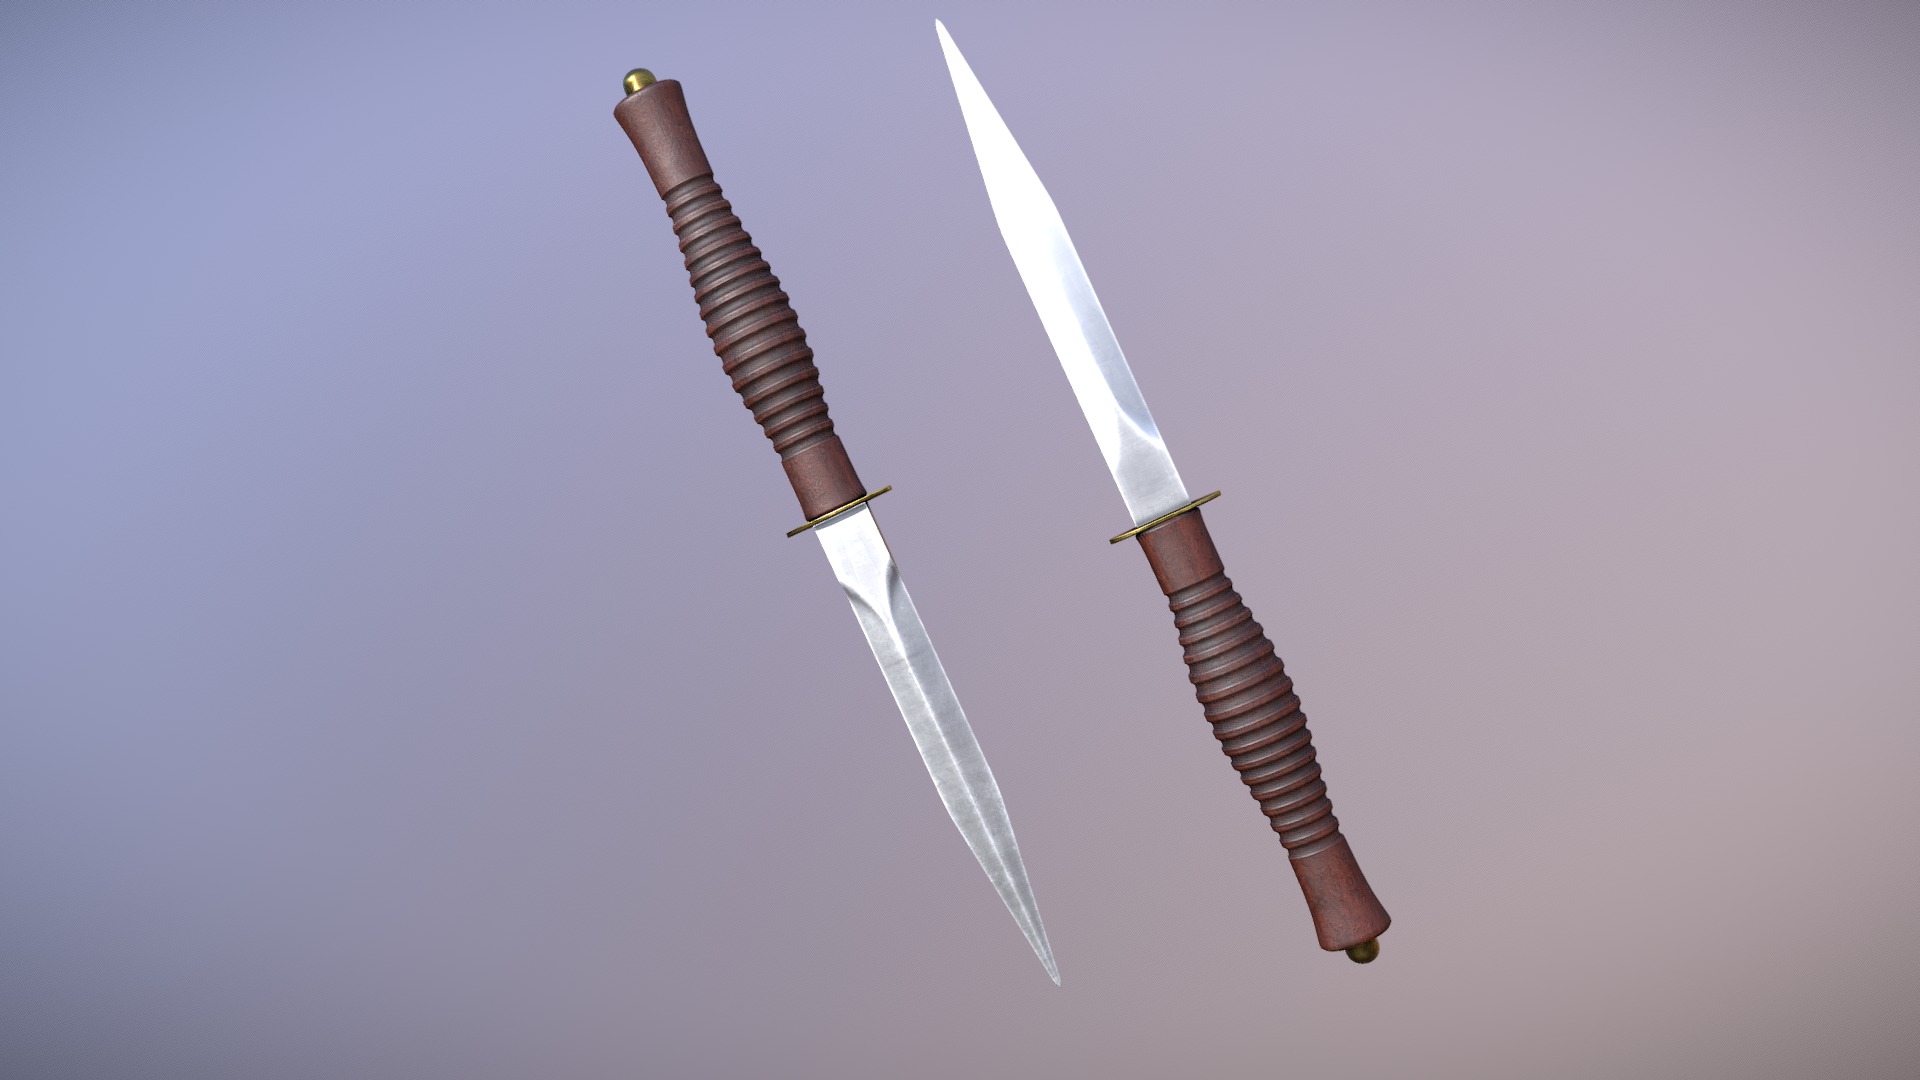 Throwing Knife designed for PBR engines.

Originally modeled in 3ds Max 2019. Download includes .max, .fbx, .obj, metal/roughness PBR textures, specular/gloss PBR textures, textures for Unity and Unreal Engines, and additional texture maps such as curvature, AO, and color ID.

Specs

Approximate dimensions): 18cm x 2cm x 1cm

Model is triangulated, no n-gons. Quaded version of the model included in the download.

Textures

1 Material: 2048x2048 PBR set

Unity Engine 5 Textures: AlbedoTransparency, MetallicSmoothness, Normal, Occlusion

Unreal Engine 4 Textures: BaseColor, Normal, RoughnessMetallicAO, Opacity - Throwing Knife - Buy Royalty Free 3D model by Luchador (@Luchador90) 3d model